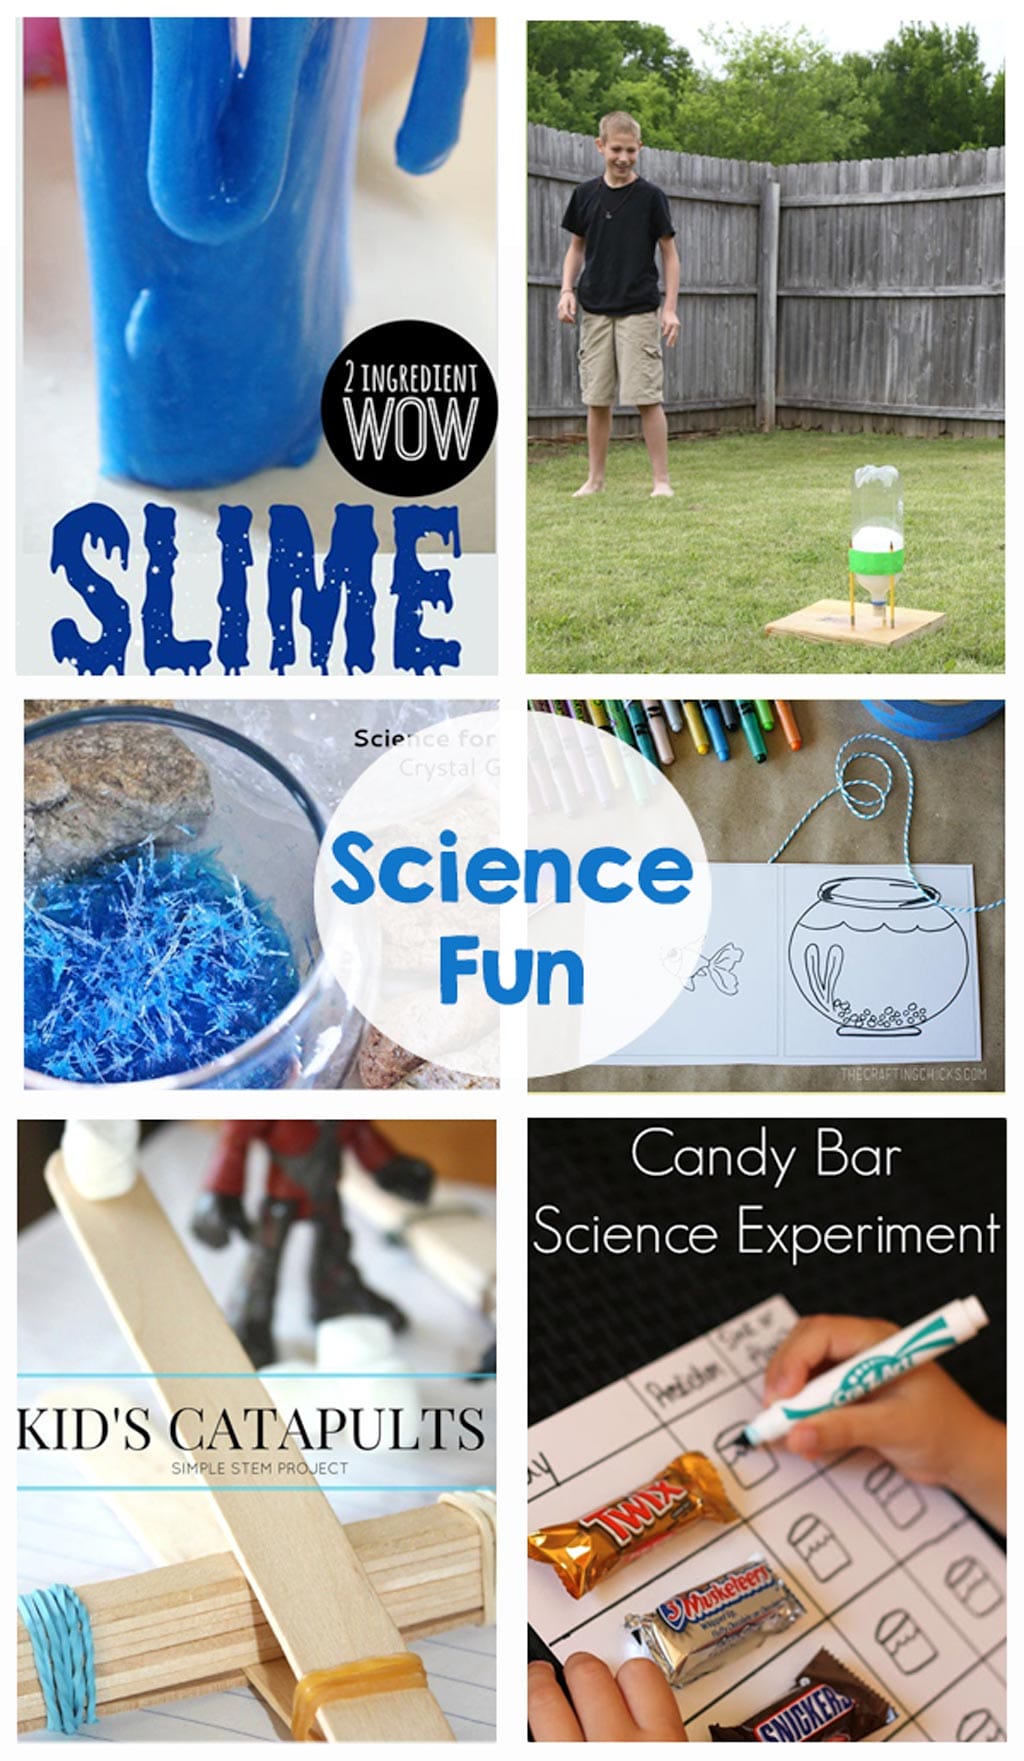 Science Fun - Game, printables, science experiments, crafts, kids activities, and STEM - Everything you need to keep kids entertained this summer!